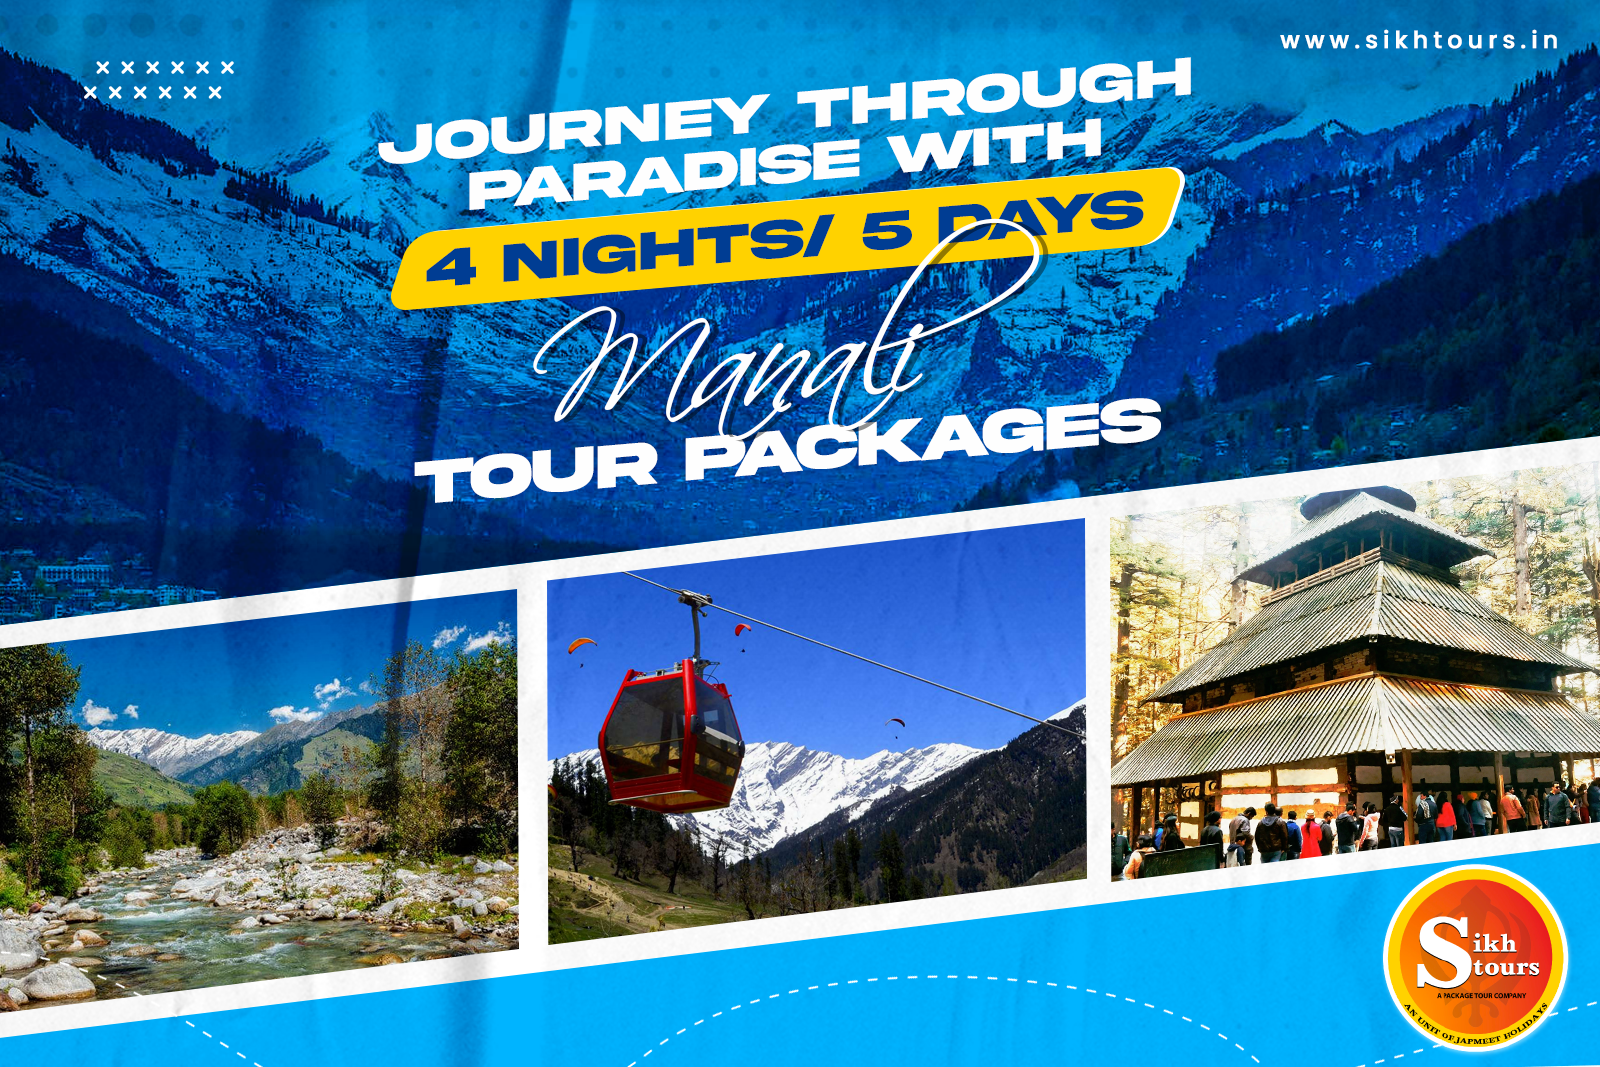 Journey Through Paradise with 4 Nights/ 5 Days Manali Tour Packages